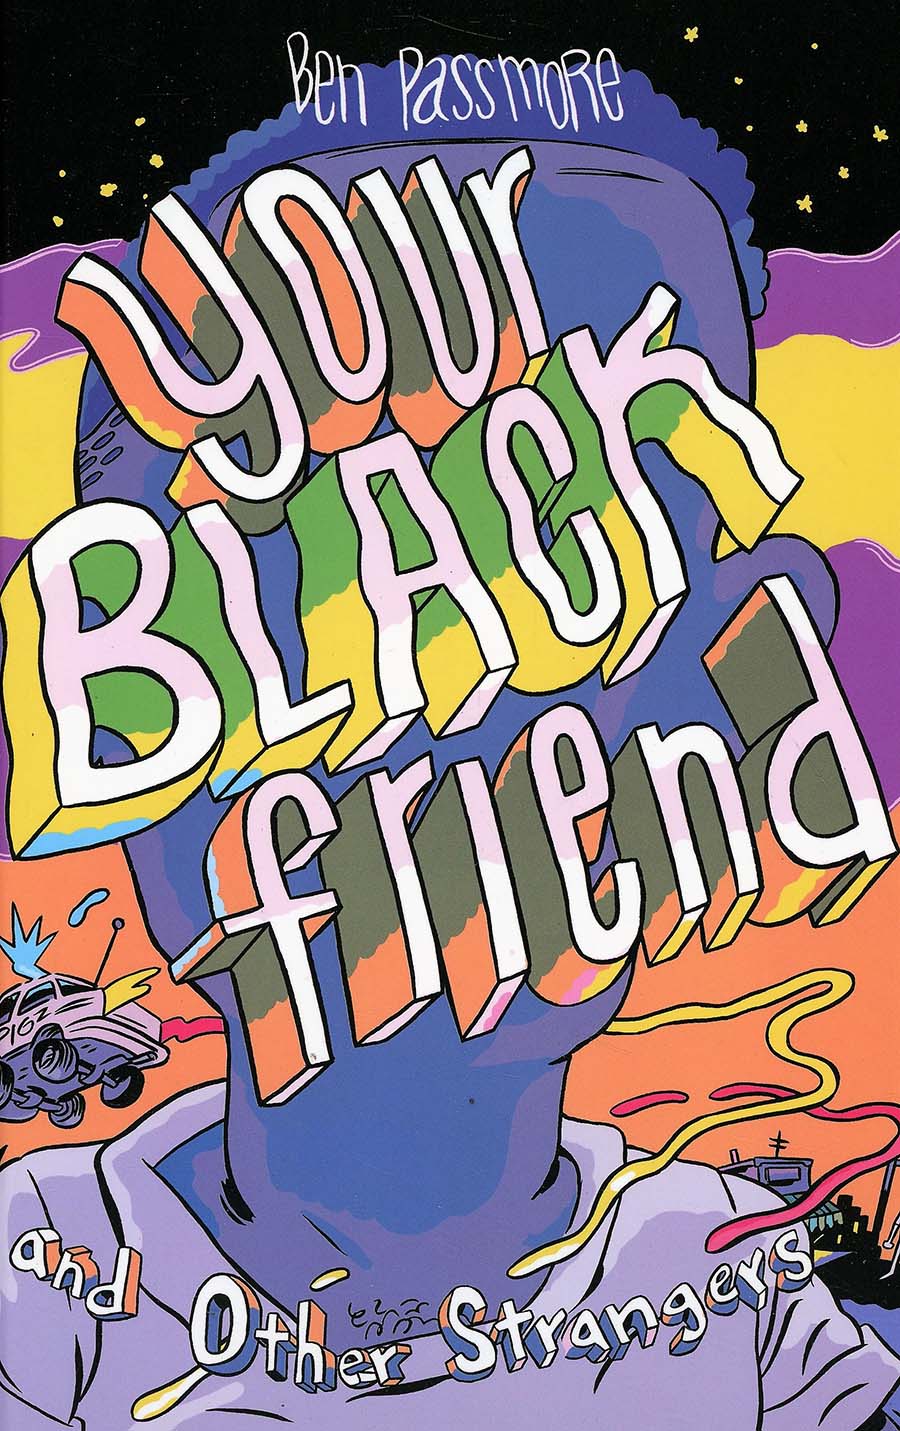 Your Black Friend And Other Strangers HC